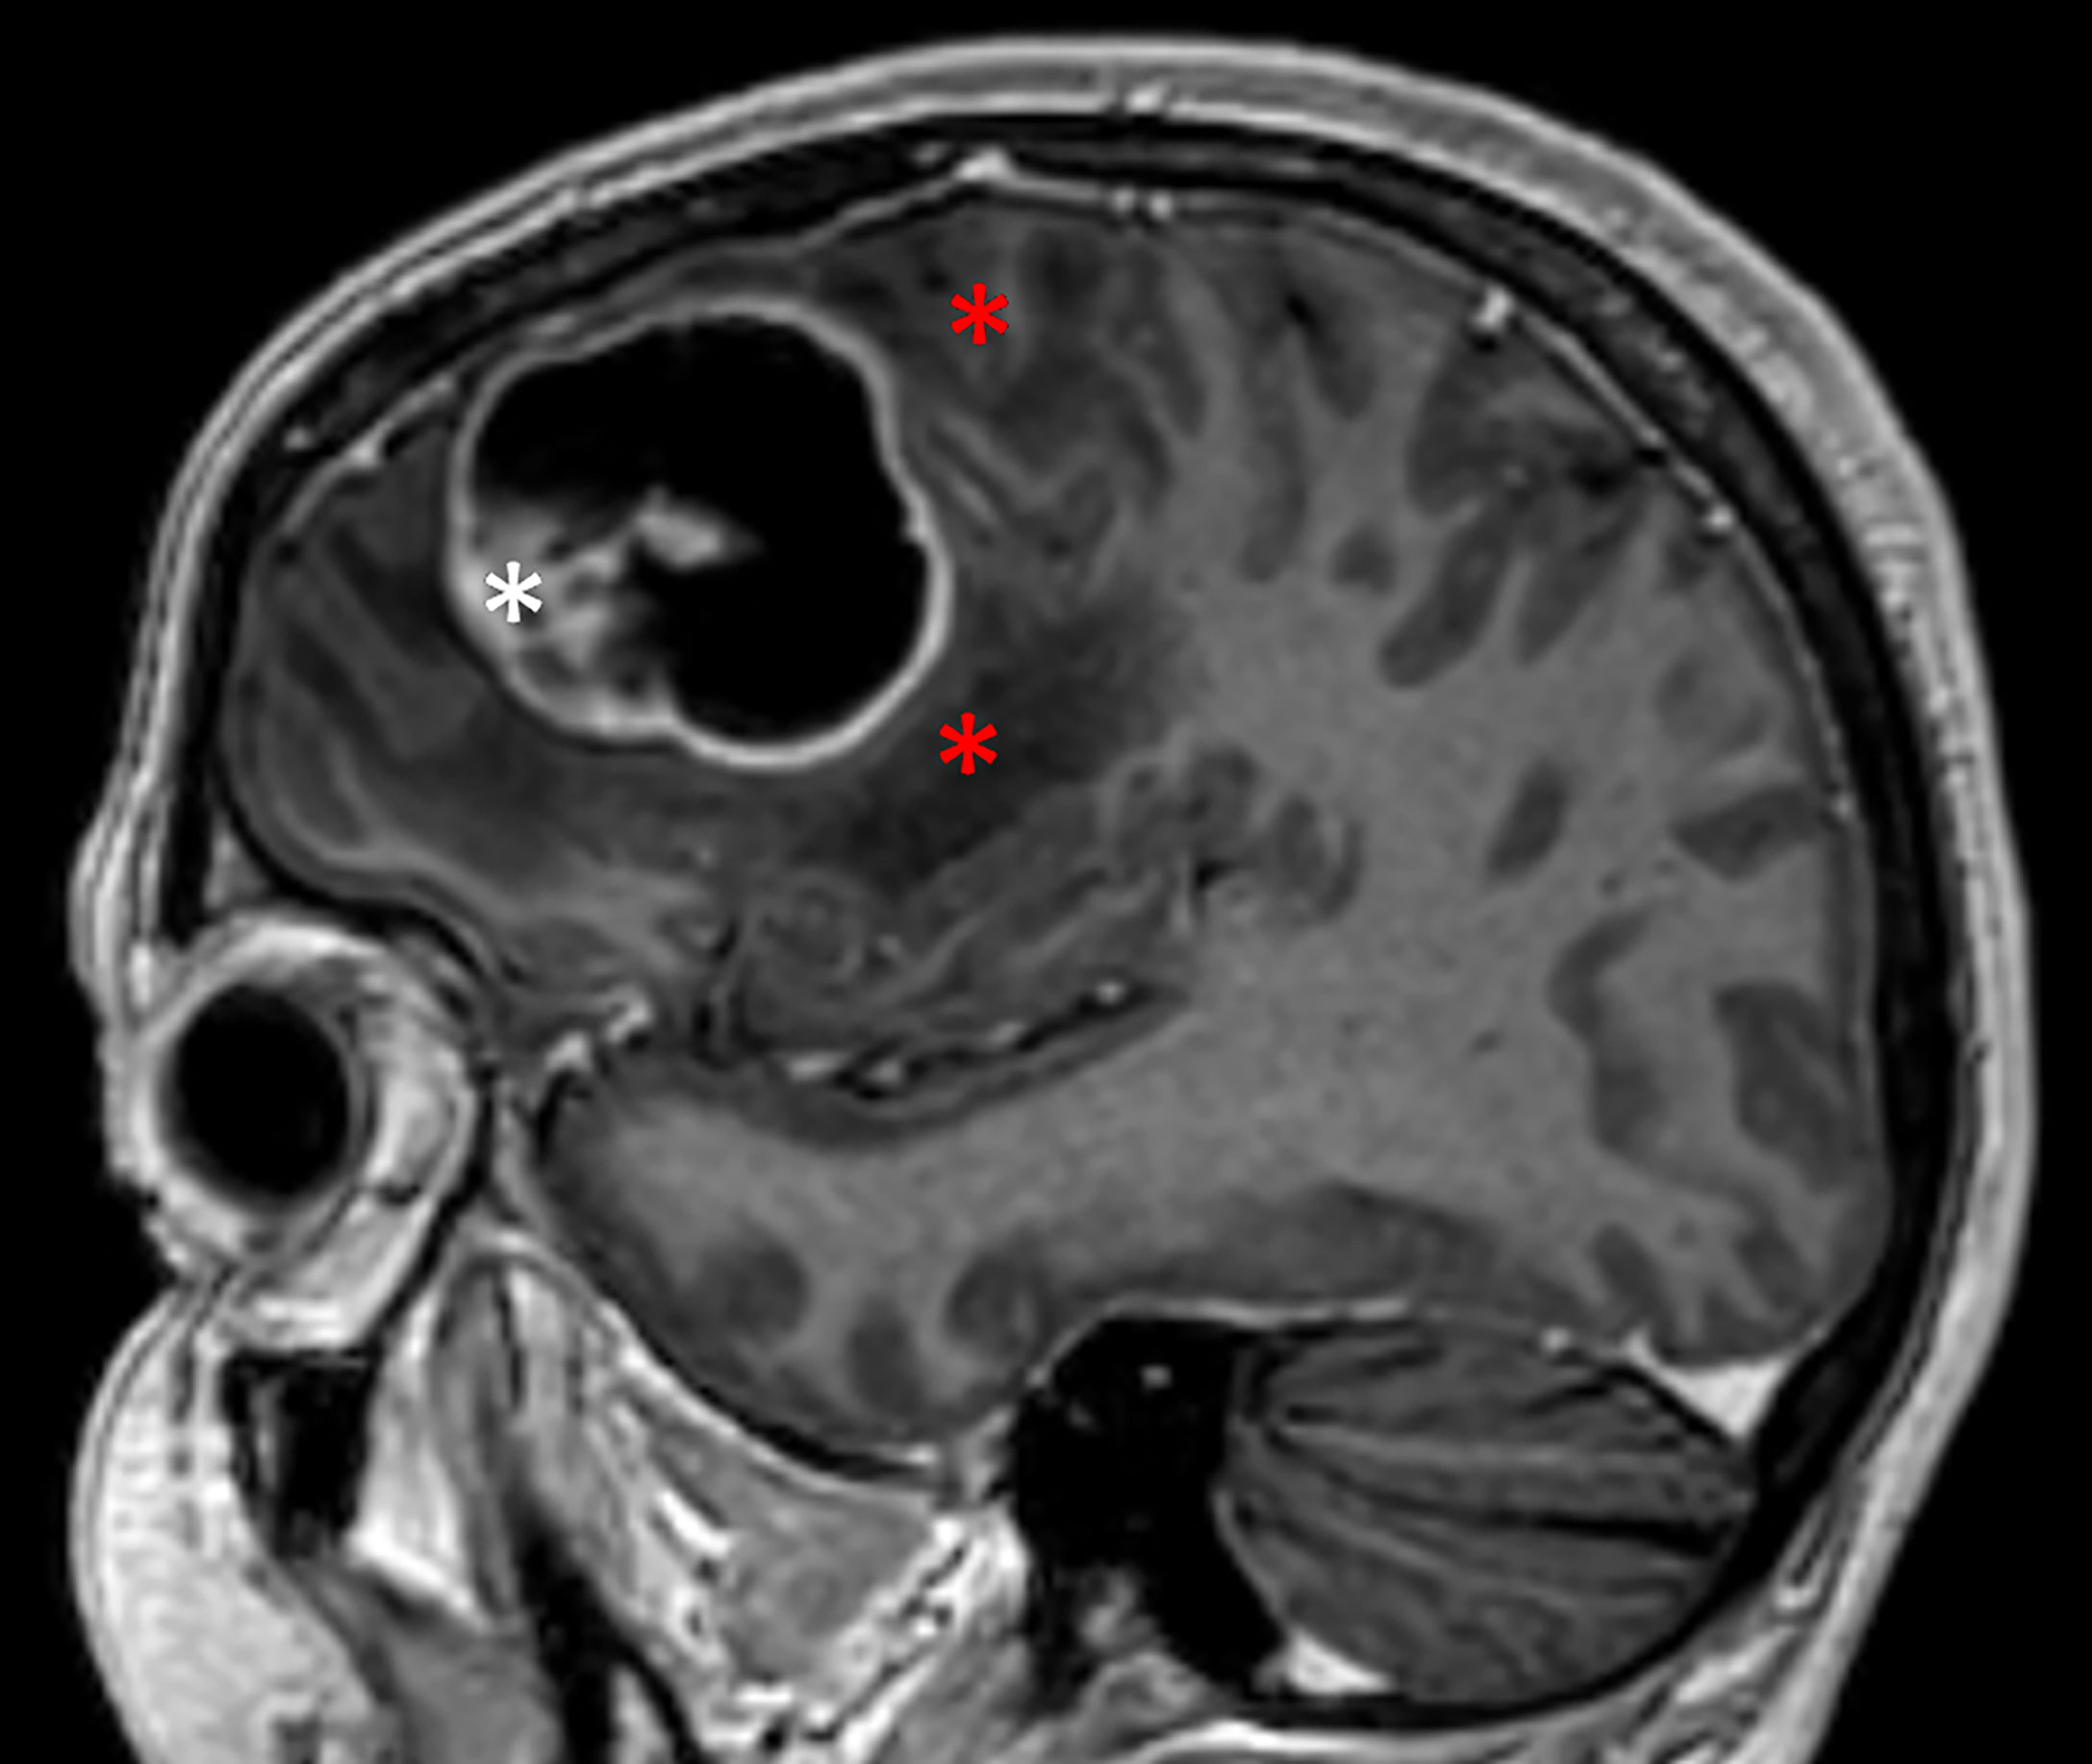 Frontiers | Pro-inflammatory cytokines in cystic glioblastoma: A quantitative study with a comparison with bacterial abscesses. With an MRI investigation of and destruction of the brain tissue surrounding a glioblastoma